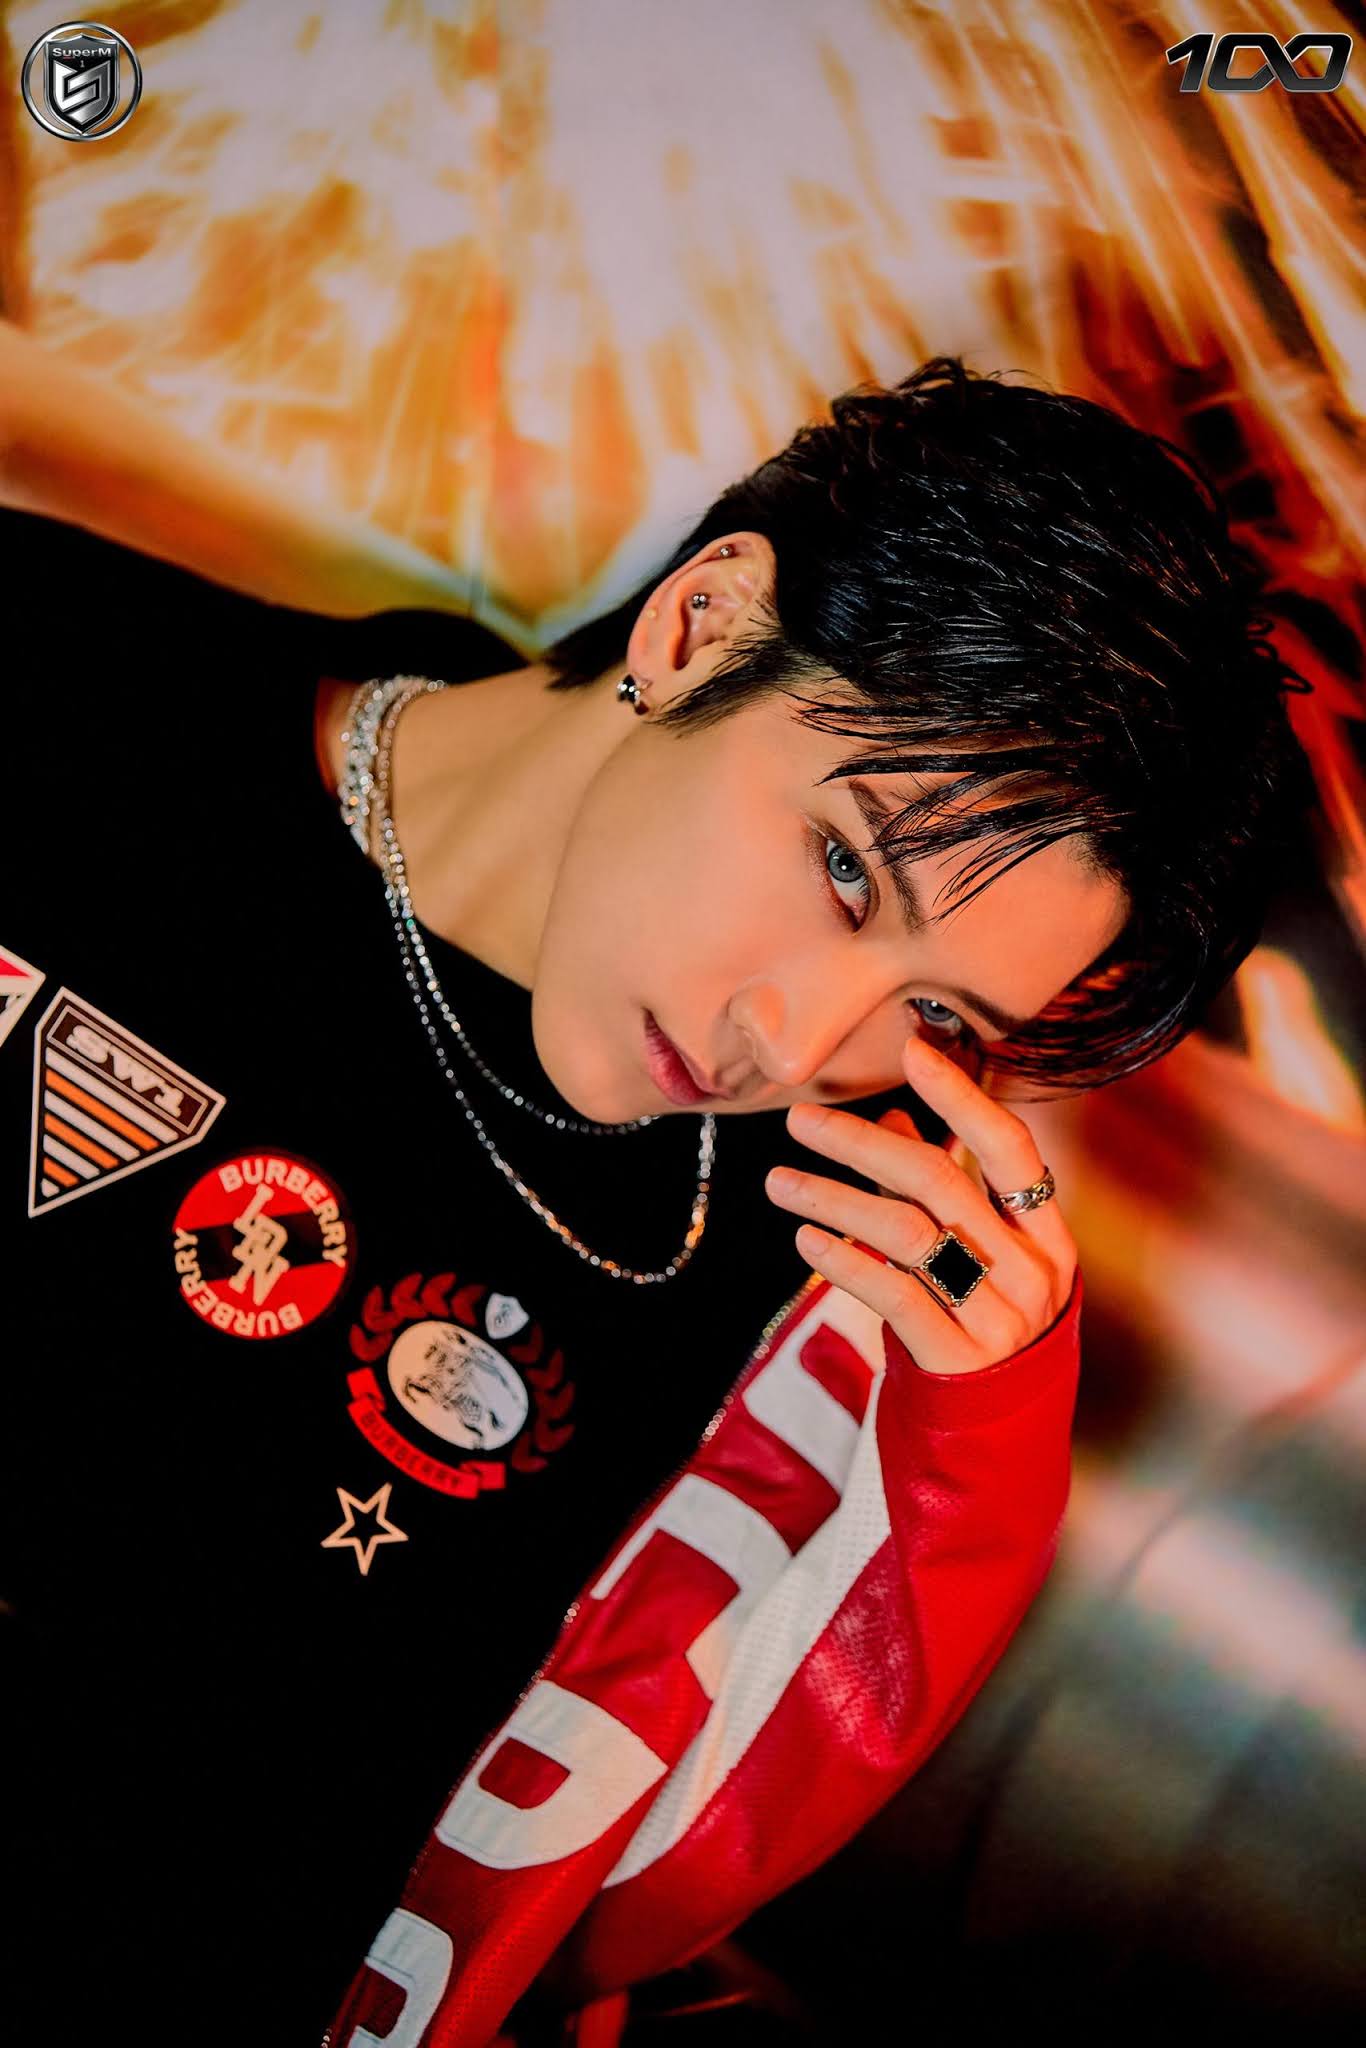 SuperM's  Kai and Ten Looks Cool on the Teaser Photos Ahead of The Release of Single '100'